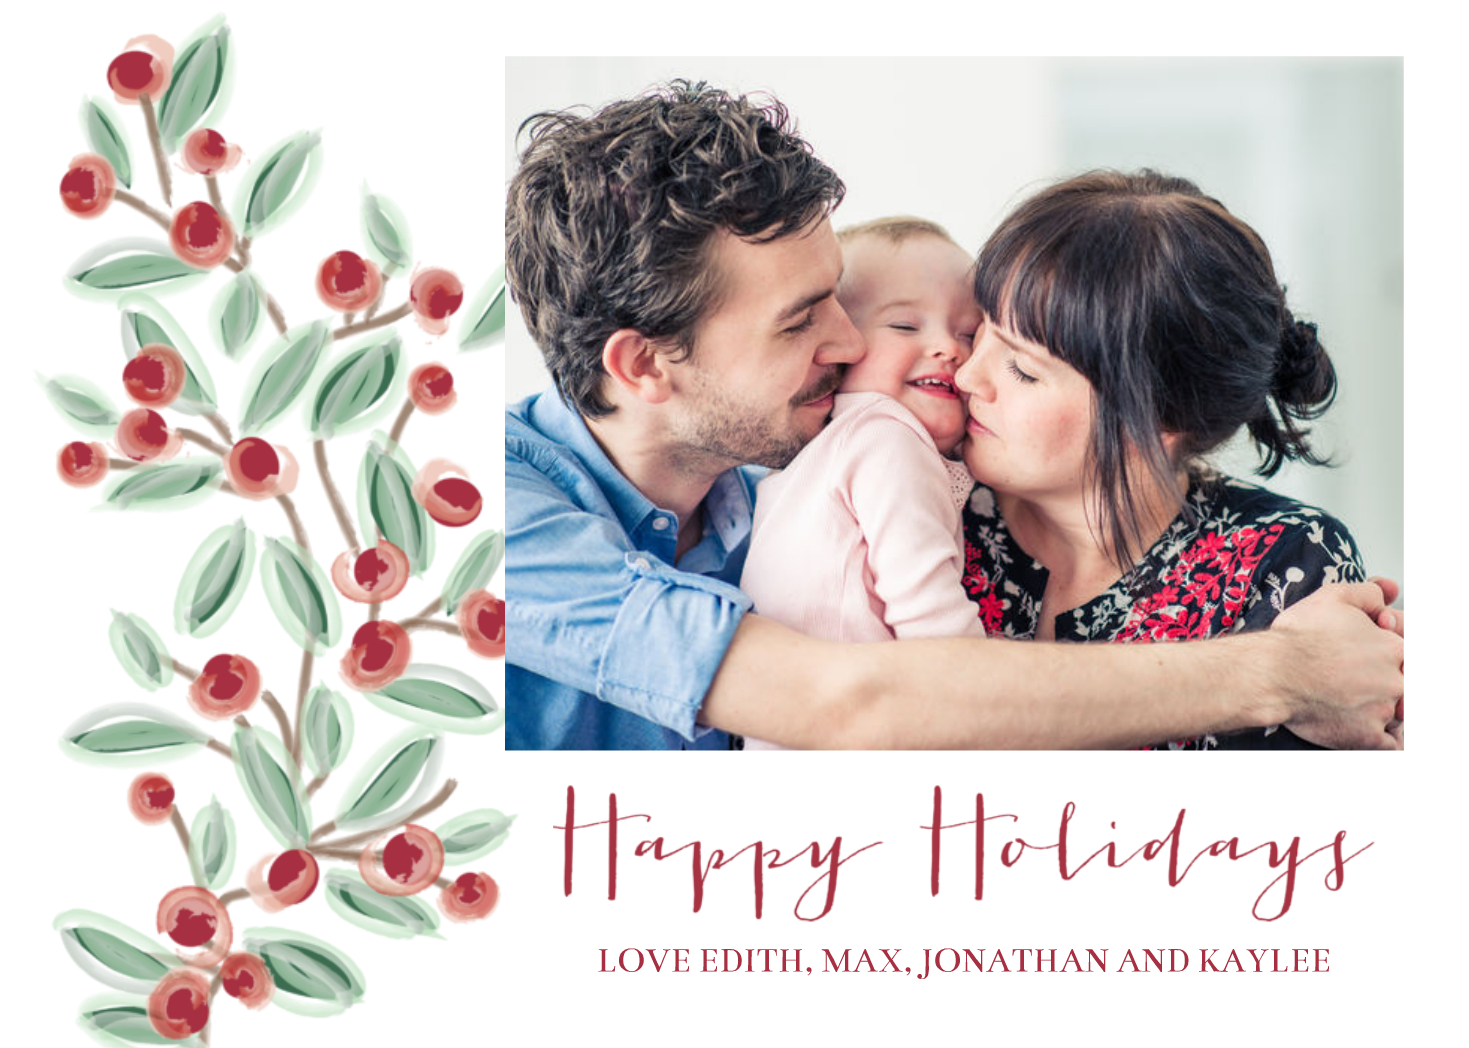 Watercolor Holiday Card Trends